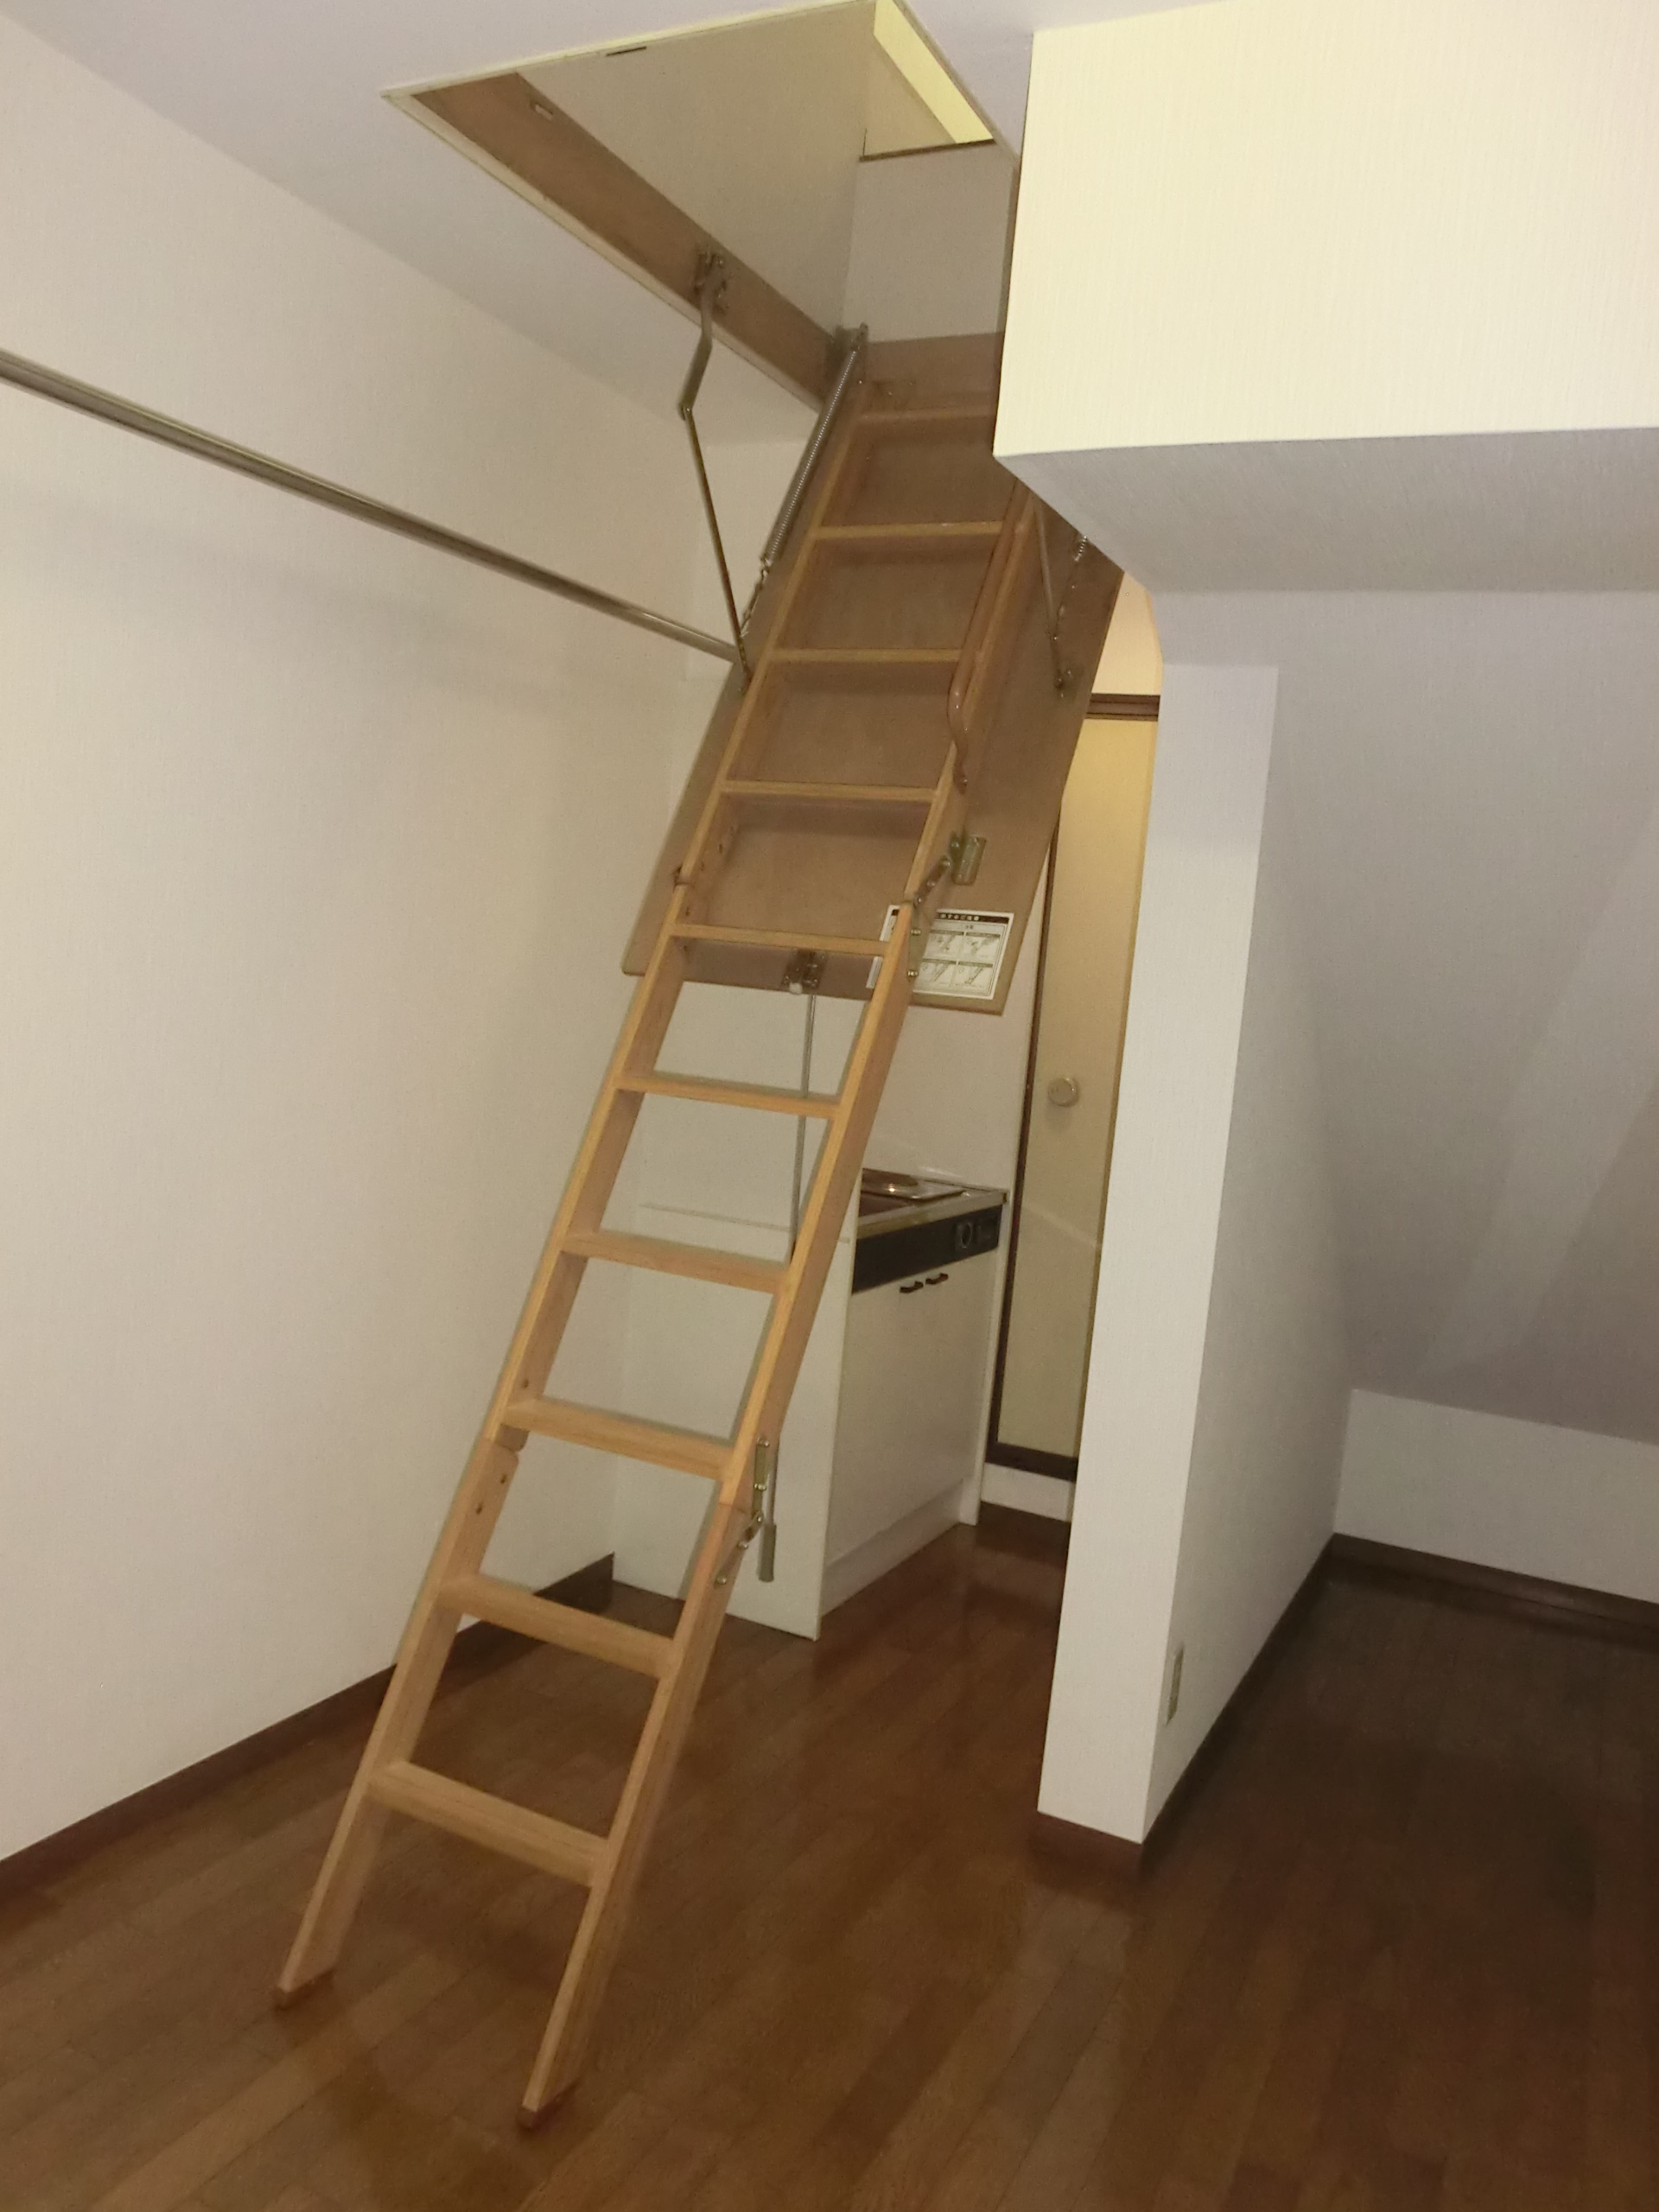 Living and room. Housing ladder there ☆ Above services Room ☆ 